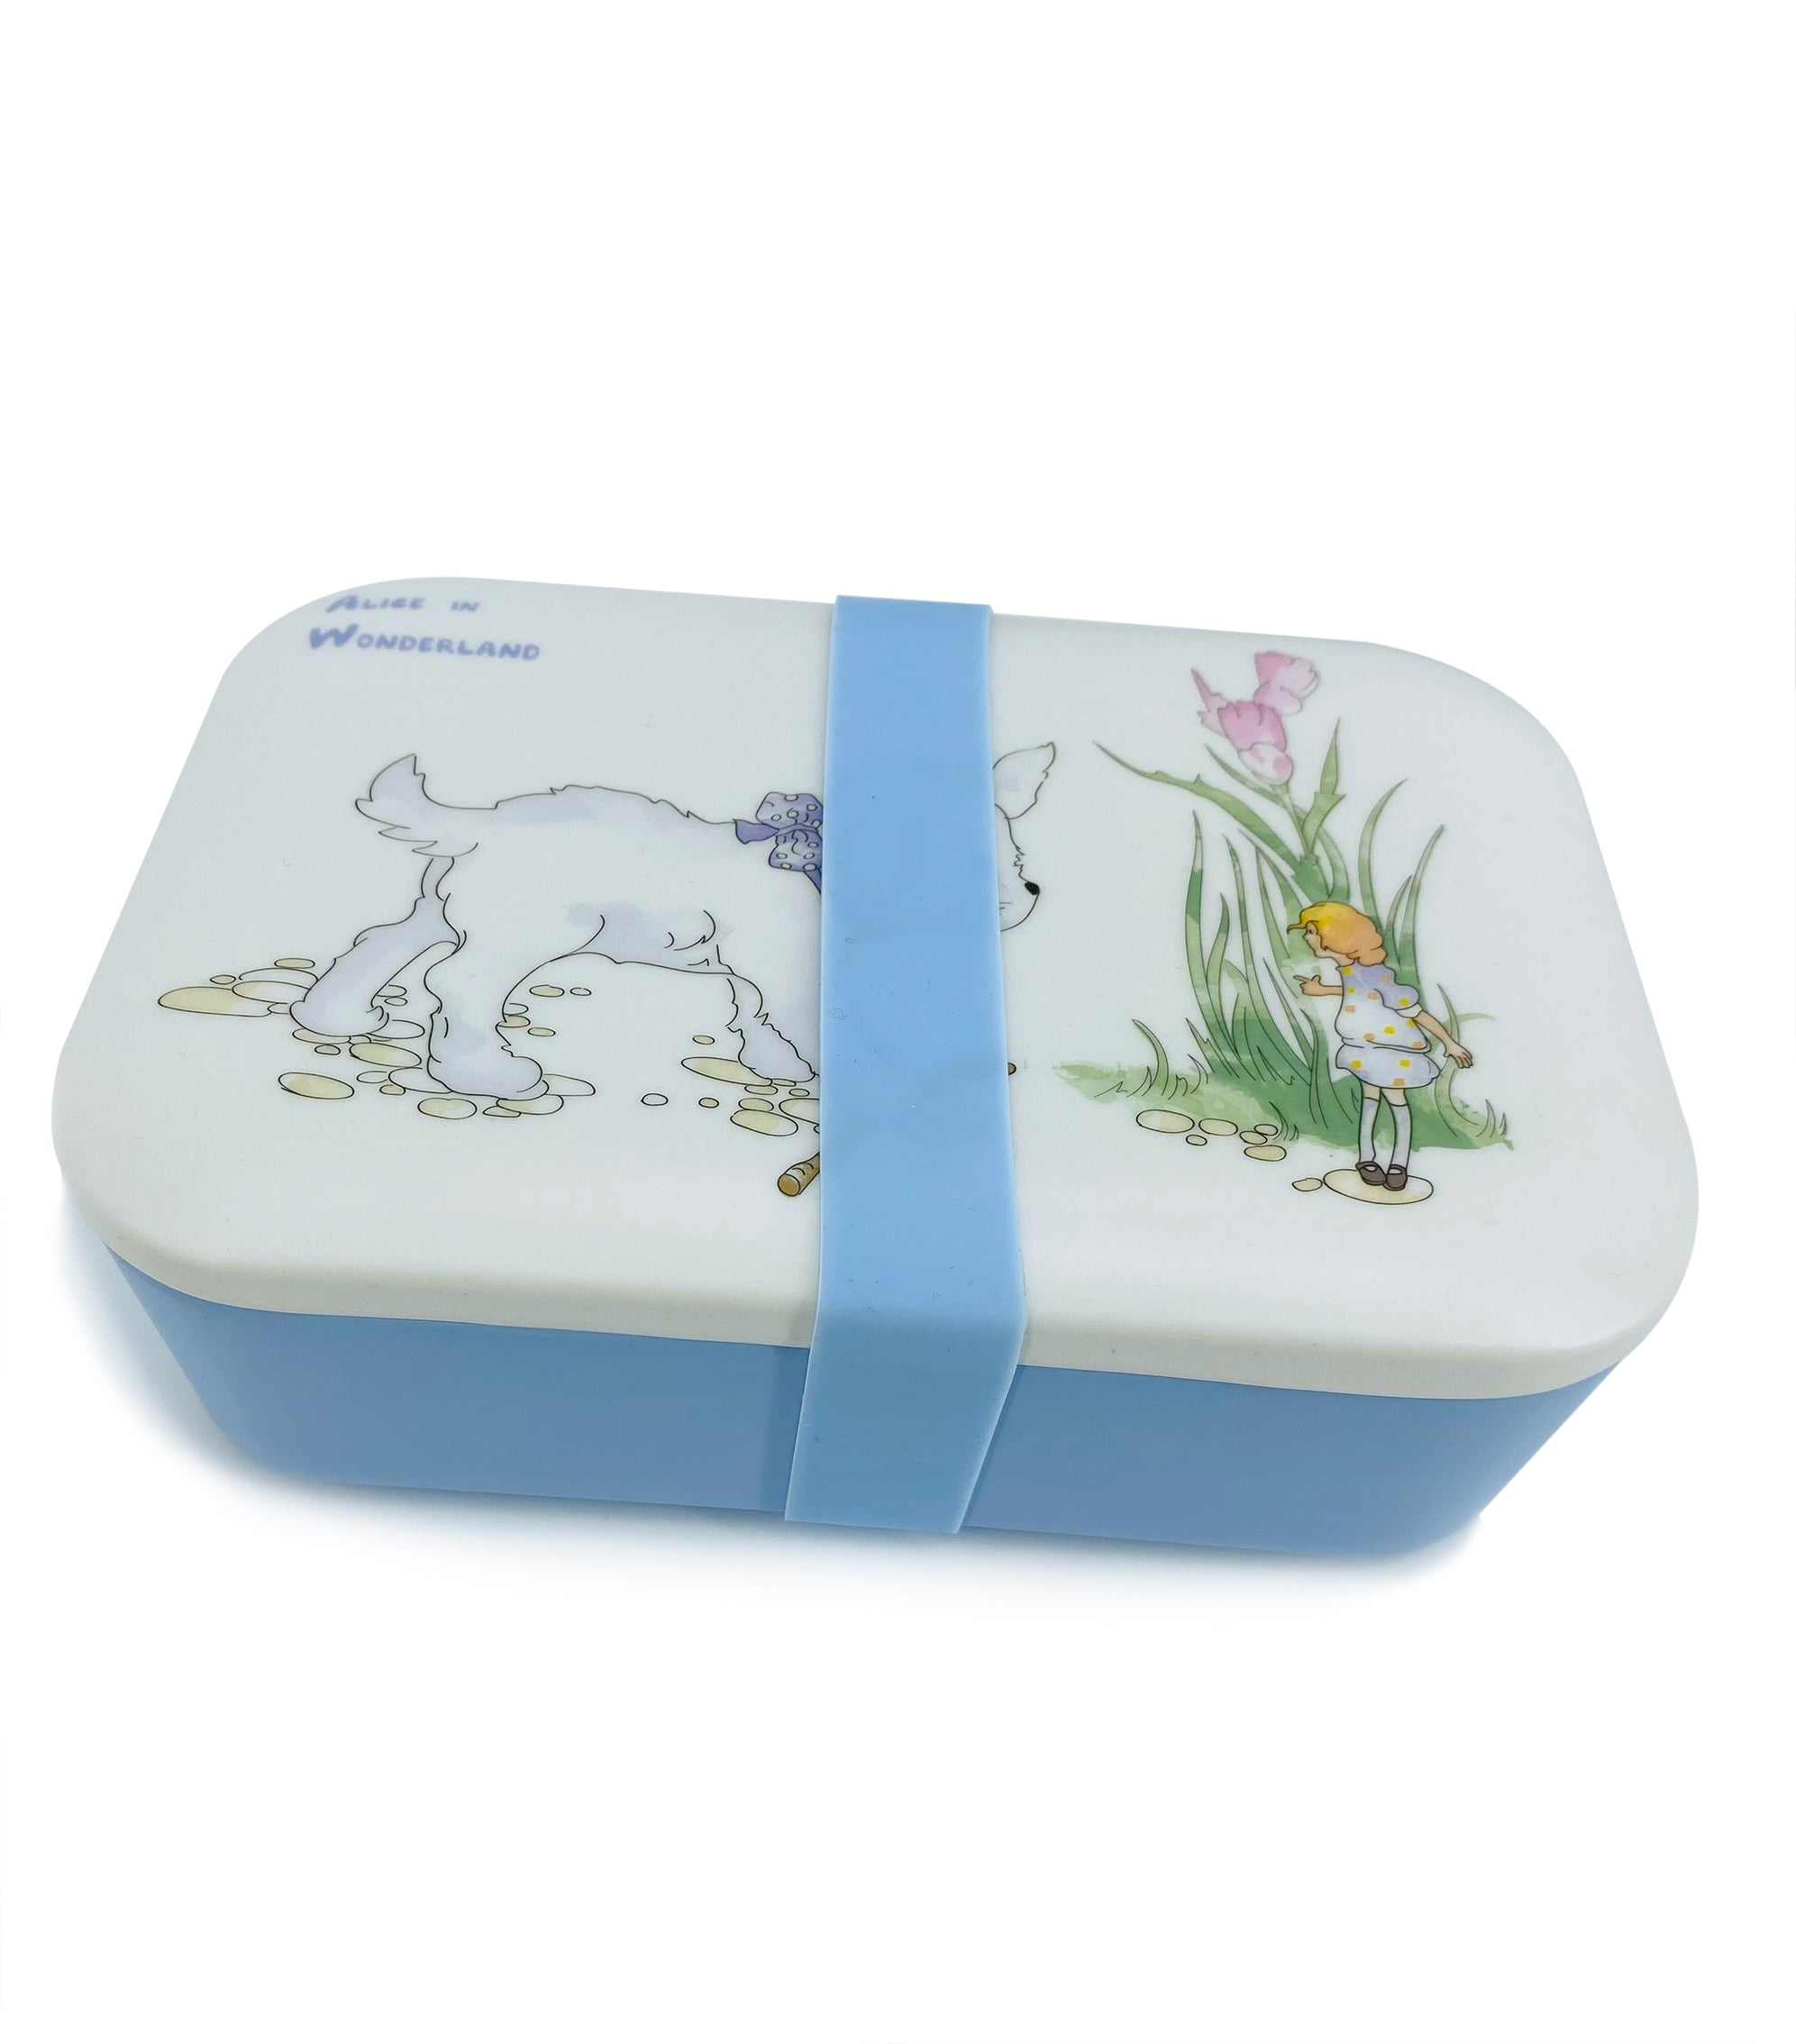 Alice in Wonderland Eco Bamboo Lunch Box Young Spirit